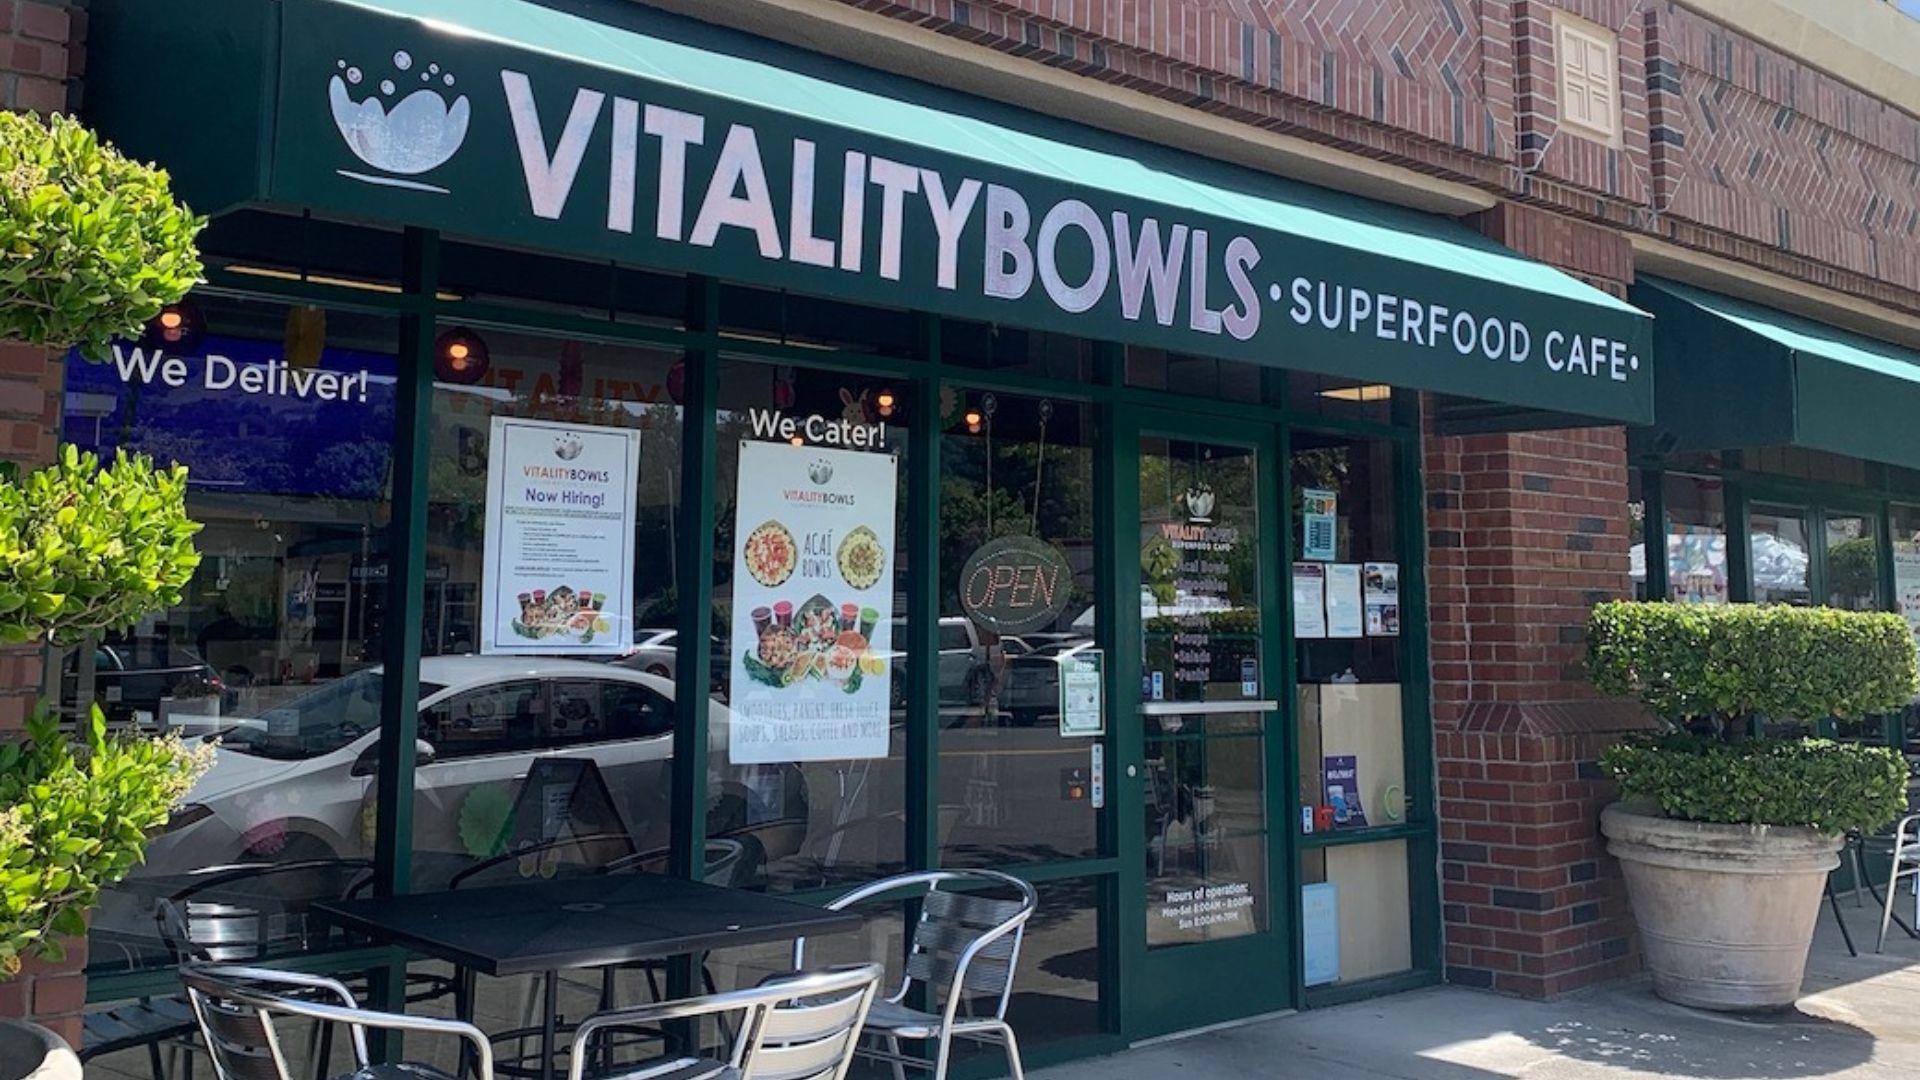 <p>Beyond pizza chains, other fast-food outlets are also feeling the pressure. Brian Hom, owner of two Vitality Bowls restaurants in San Jose, has had to operate his stores with half the typical number of employees.  </p> <p>This has led to longer wait times for customers and higher prices to cover the added labor costs. Hom <a href="https://www.wsj.com/business/hospitality/california-restaurants-cut-jobs-as-fast-food-wages-set-to-rise-eb5ddaaa?mod=business_lead_story">said</a> "I’m definitely not going to hire anymore," indicating the difficult decisions business owners are facing.   </p>